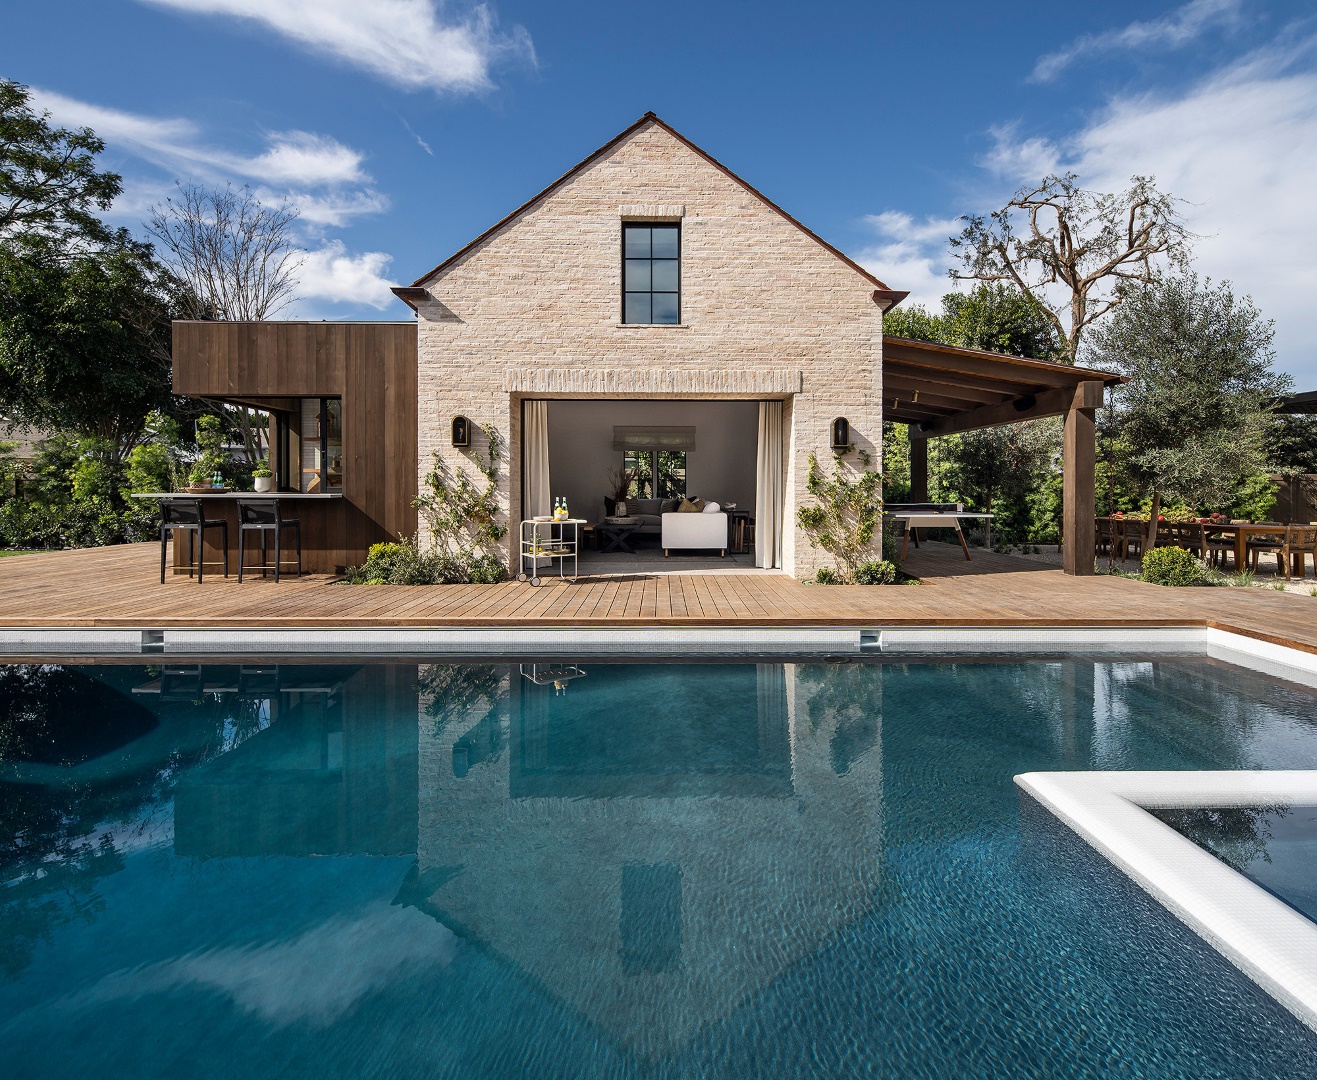 16 Transitional Swimming Pool Designs to Take Your Backyard to the Next Level